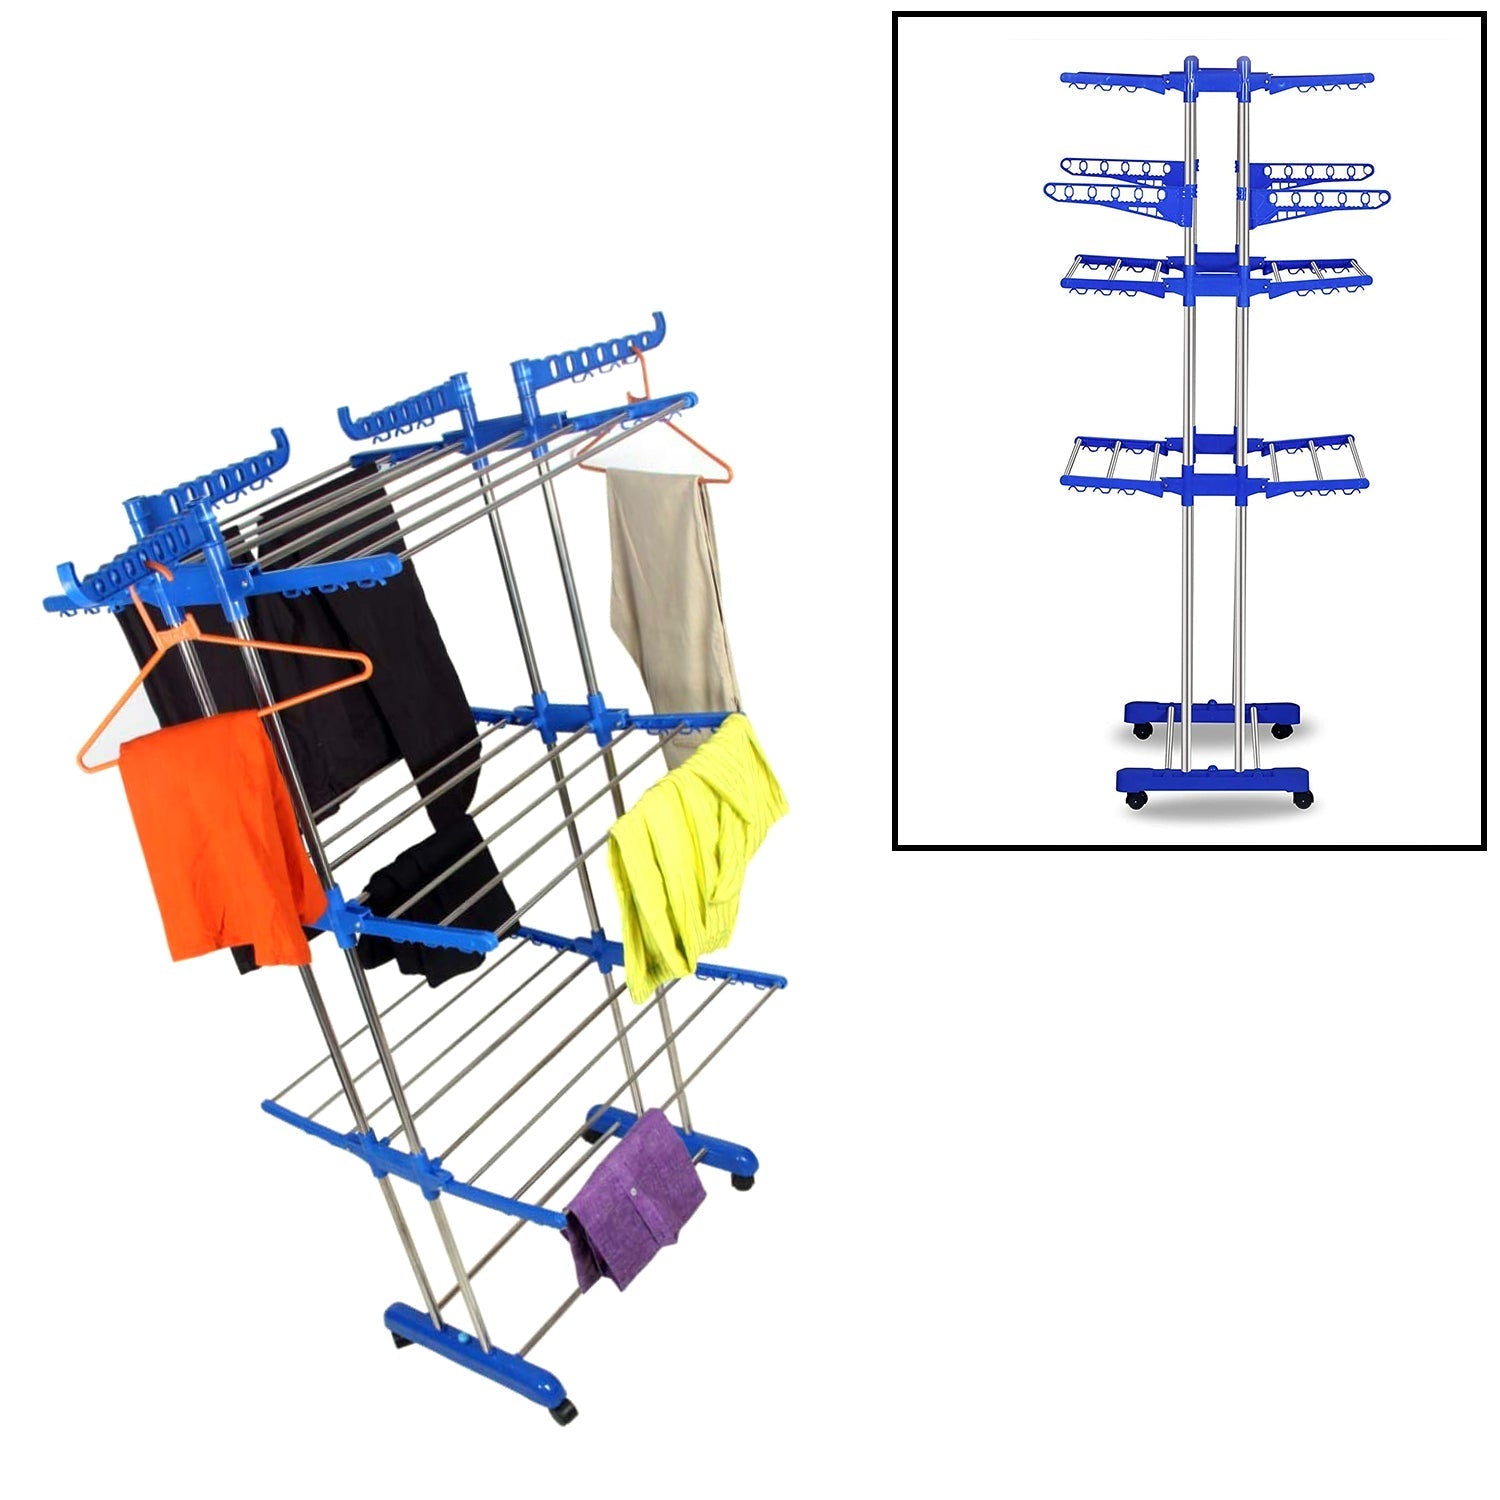 0696 Folding Double Supported 3 Layer Cloth Drying Stand Laundry Dryer Hanger with Breaking Wheels for Balcony Indoor and Outdoor Home, Steel